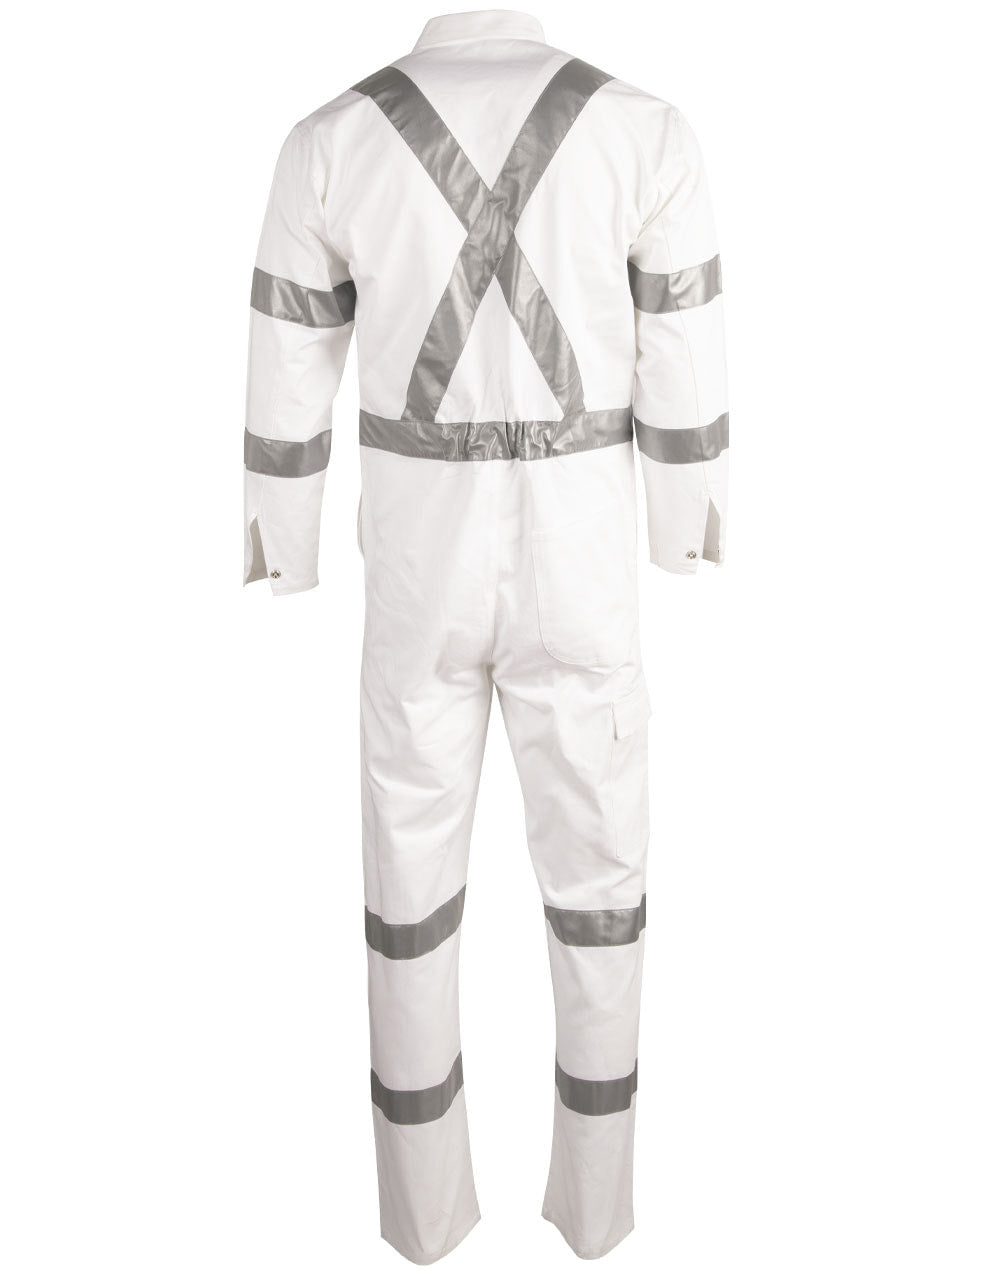 AIW WA09HV Mens biomotion nightwear coverall with x back tape configuration